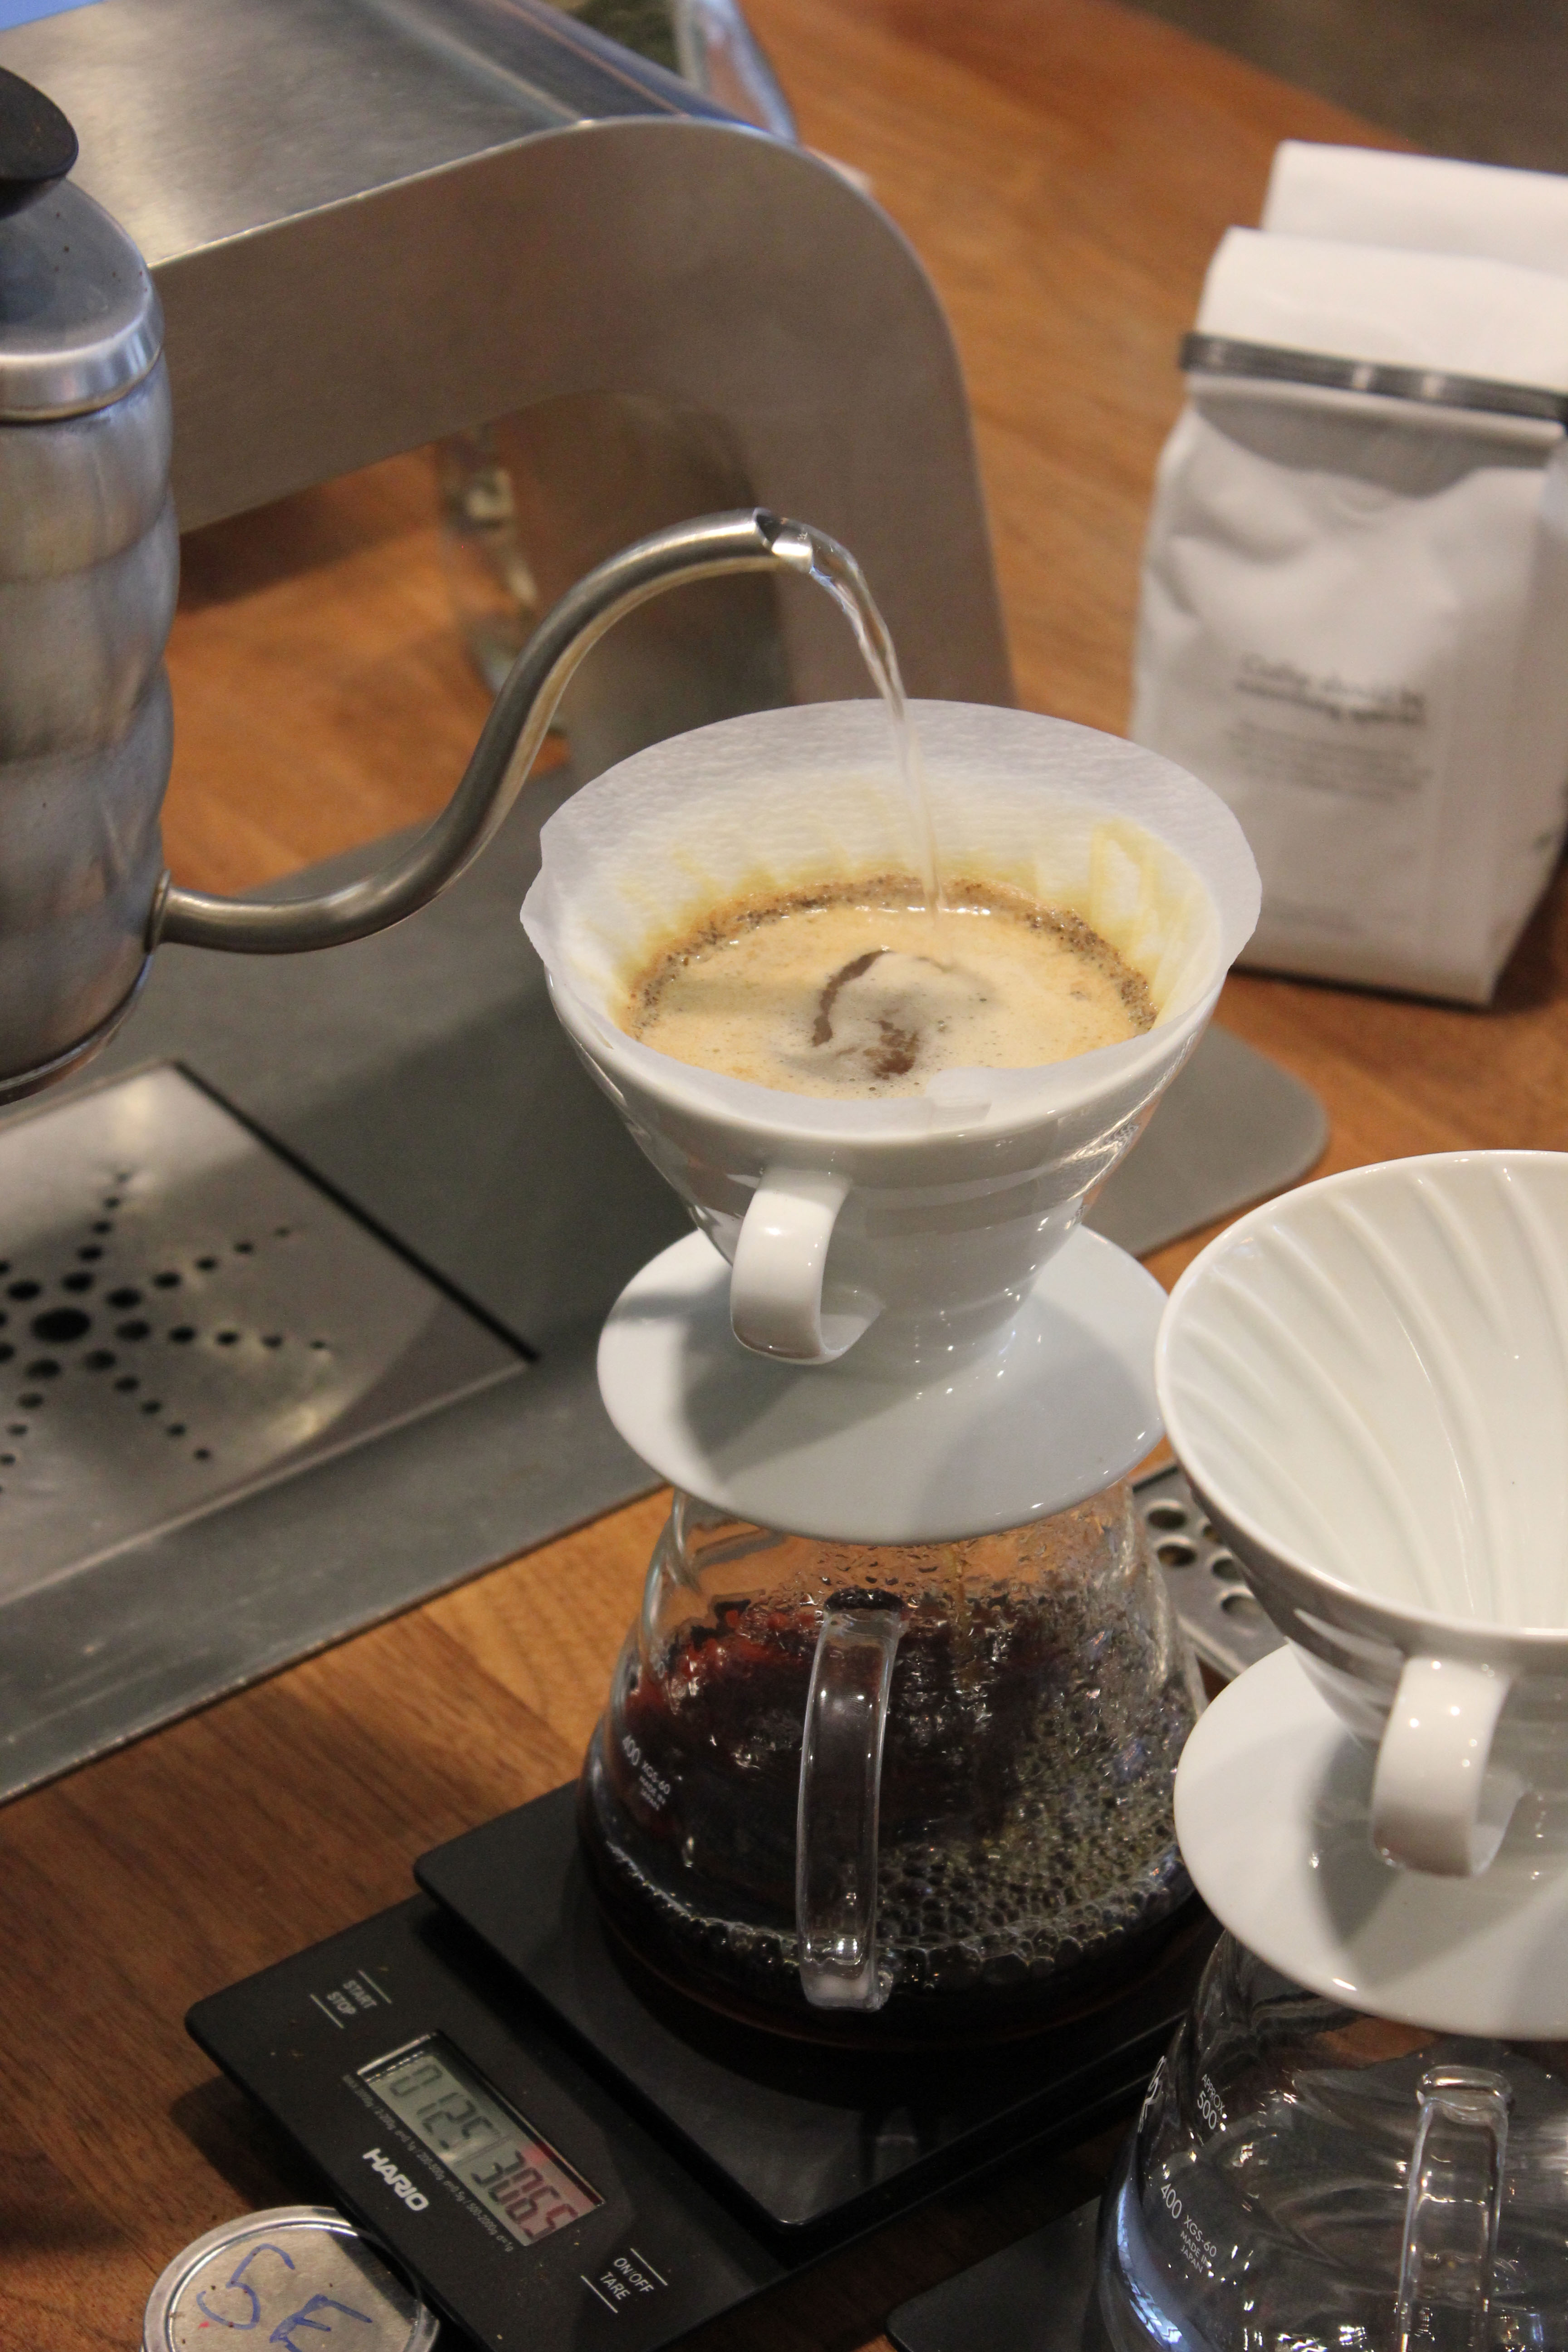 The pour-over technique allows Pour baristas to do more by hand, affording them more control over the coffee-making process.